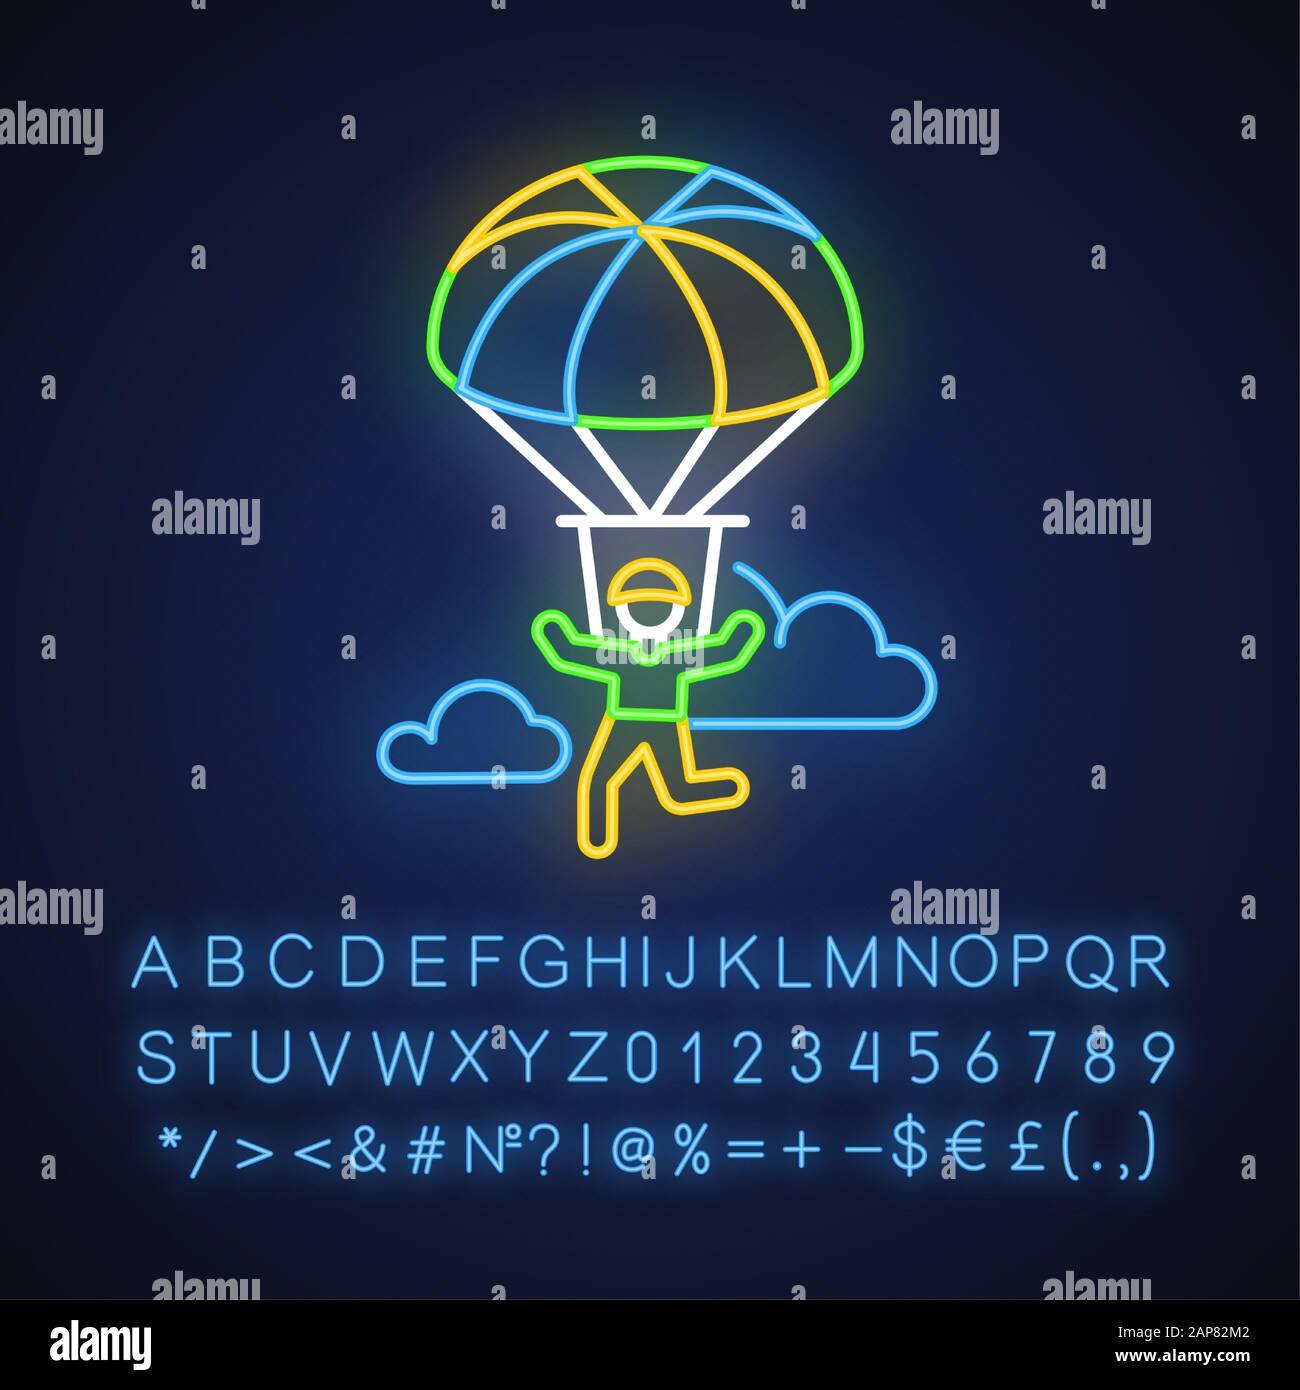 Parachuting neon light icon. Paragliding, paratrooping. Air extreme sport. Skydiving, hang gliding. Flights in sky and jumps with parachute. Glowing a Stock Vector